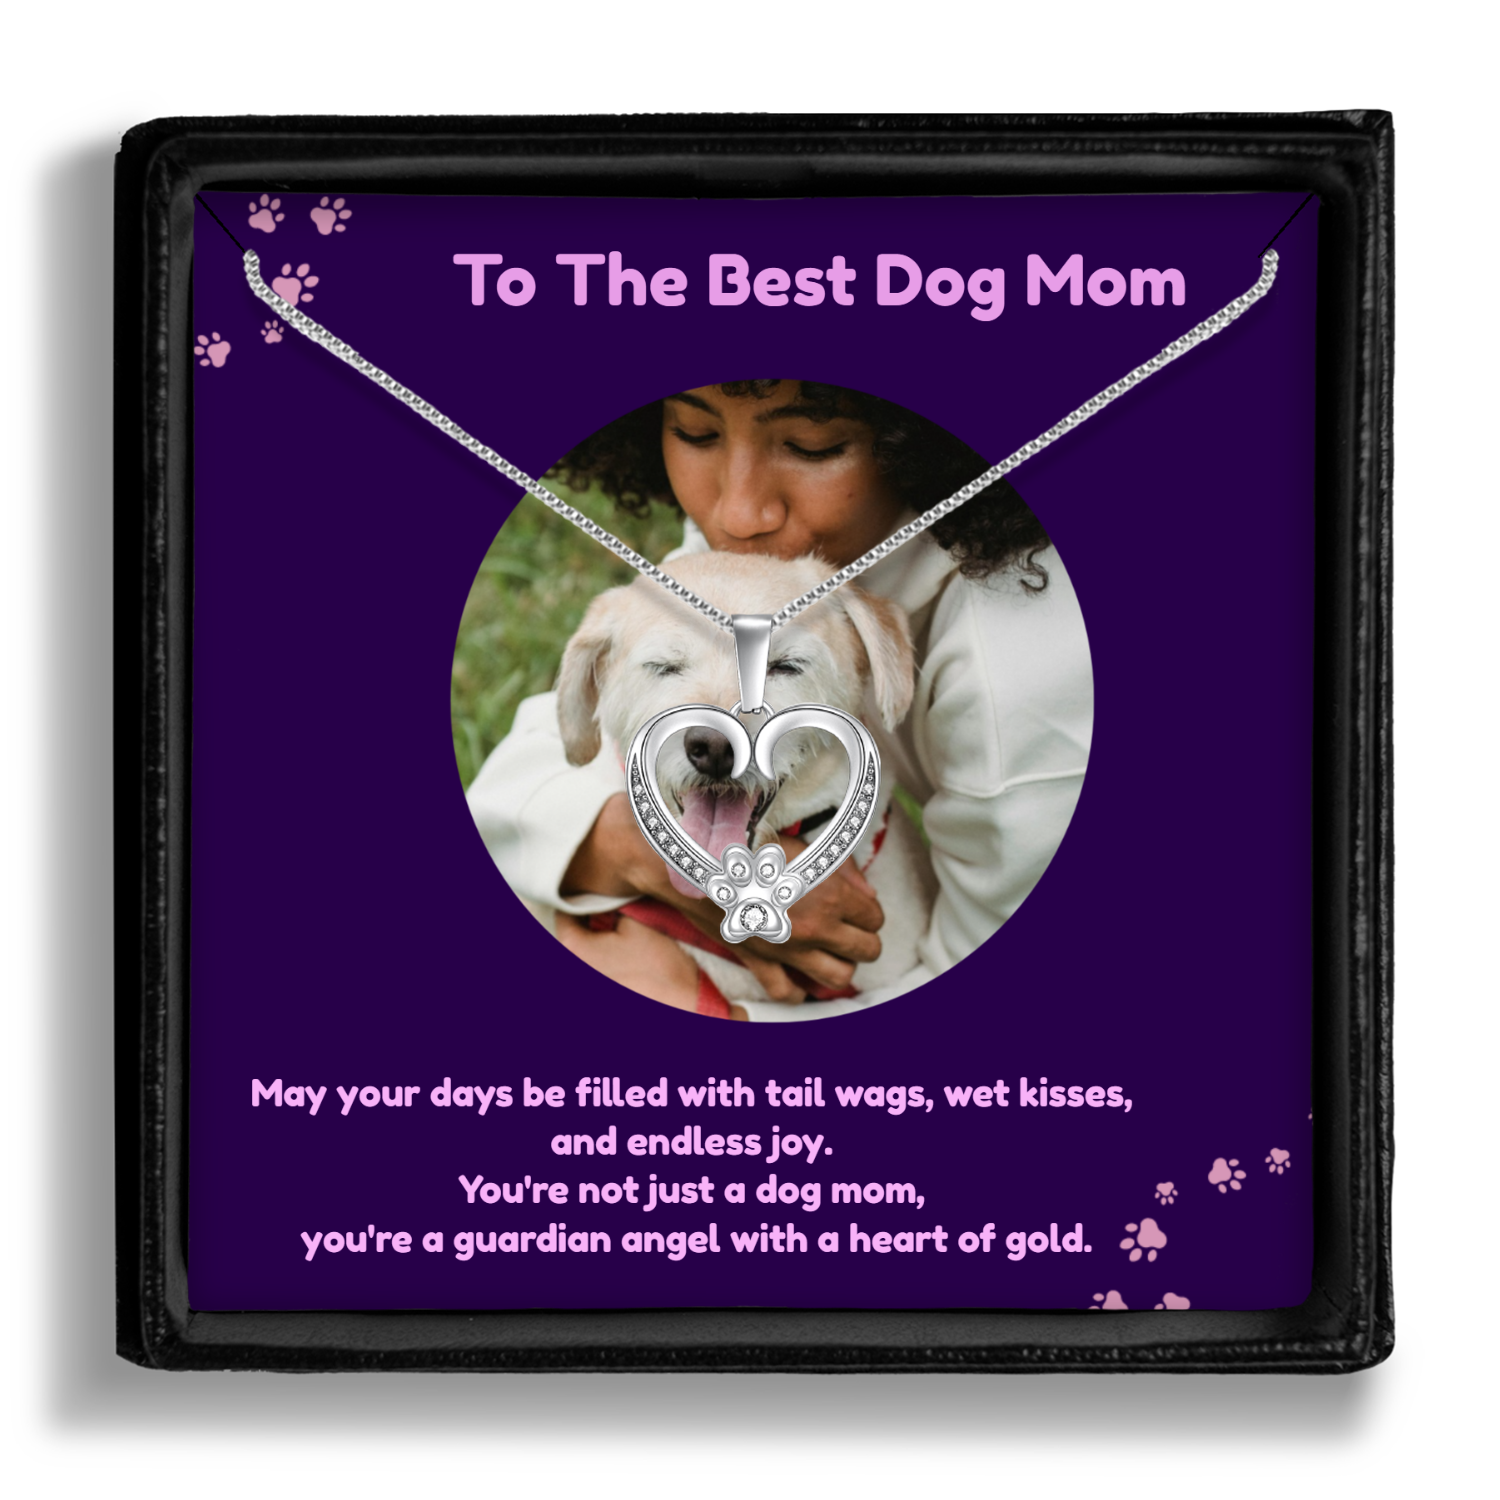 Personalized Necklaces + Message Cards - Paw Necklace + Personalized Photo Card 